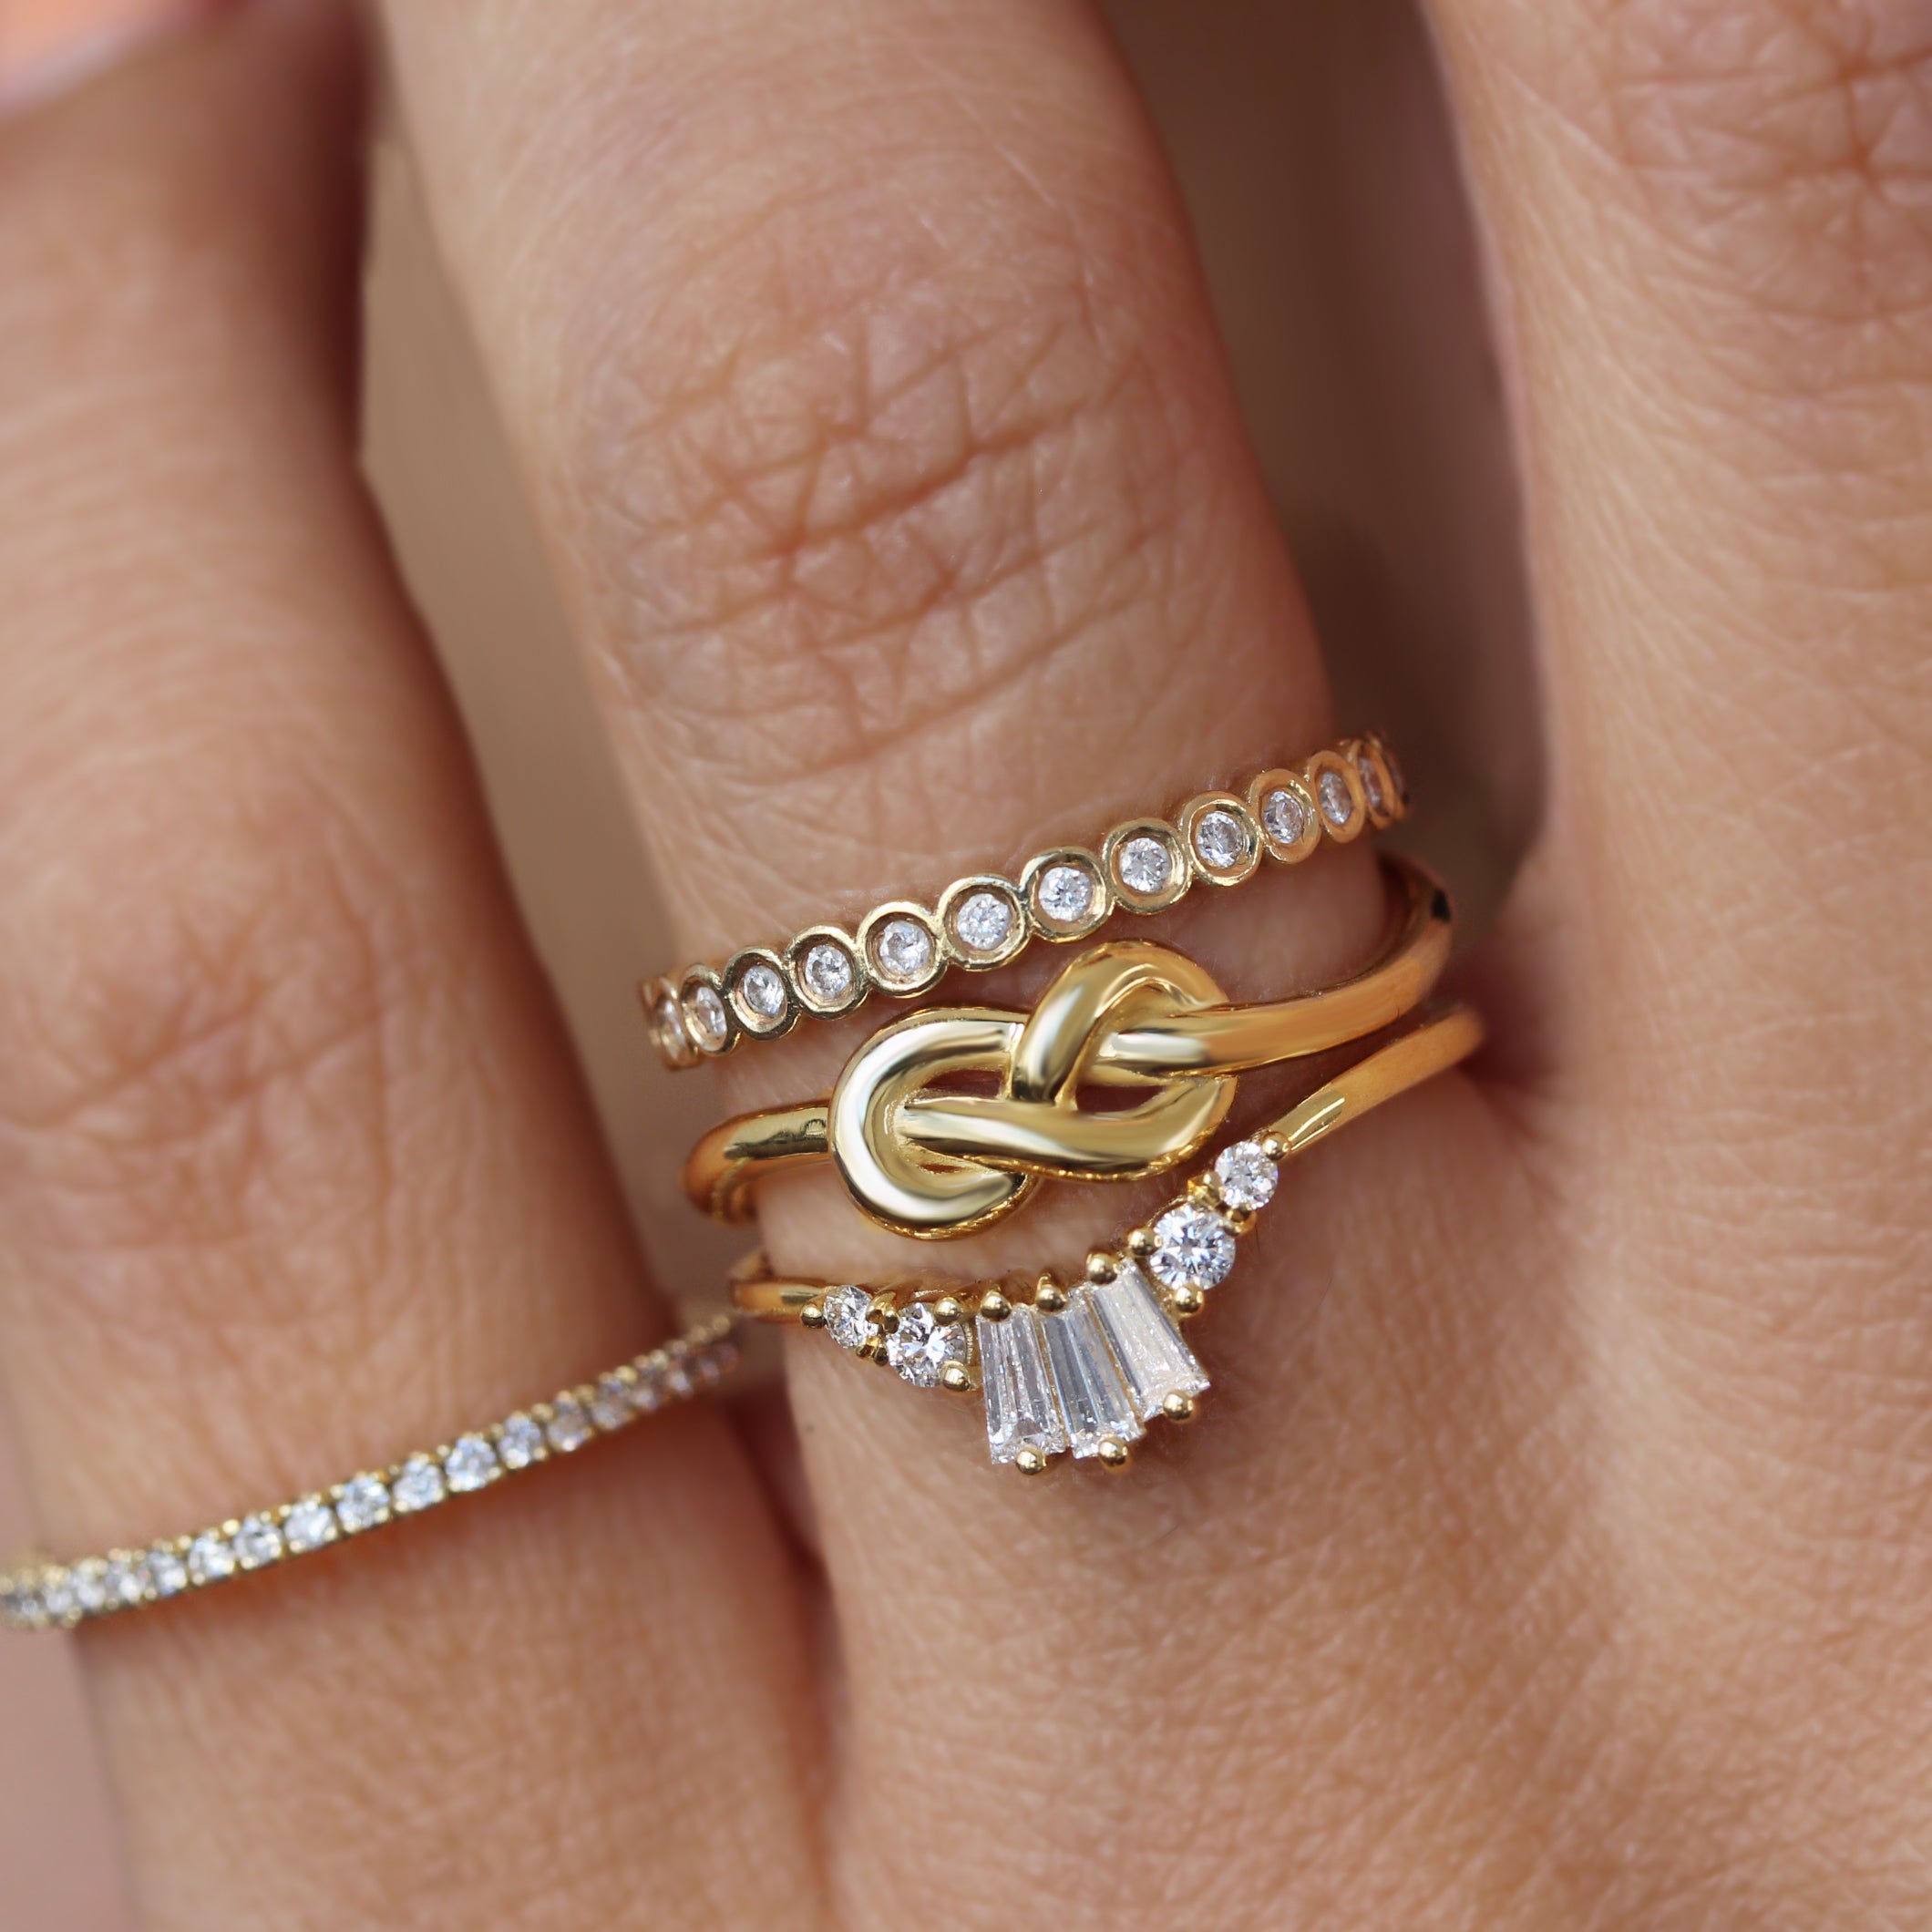 OOAK Solitaire Bezel Set, Rose Cut Pear Shape, Champagne Diamond Infinity Knot Engagement Ring, 14K Yellow Gold, Size 6